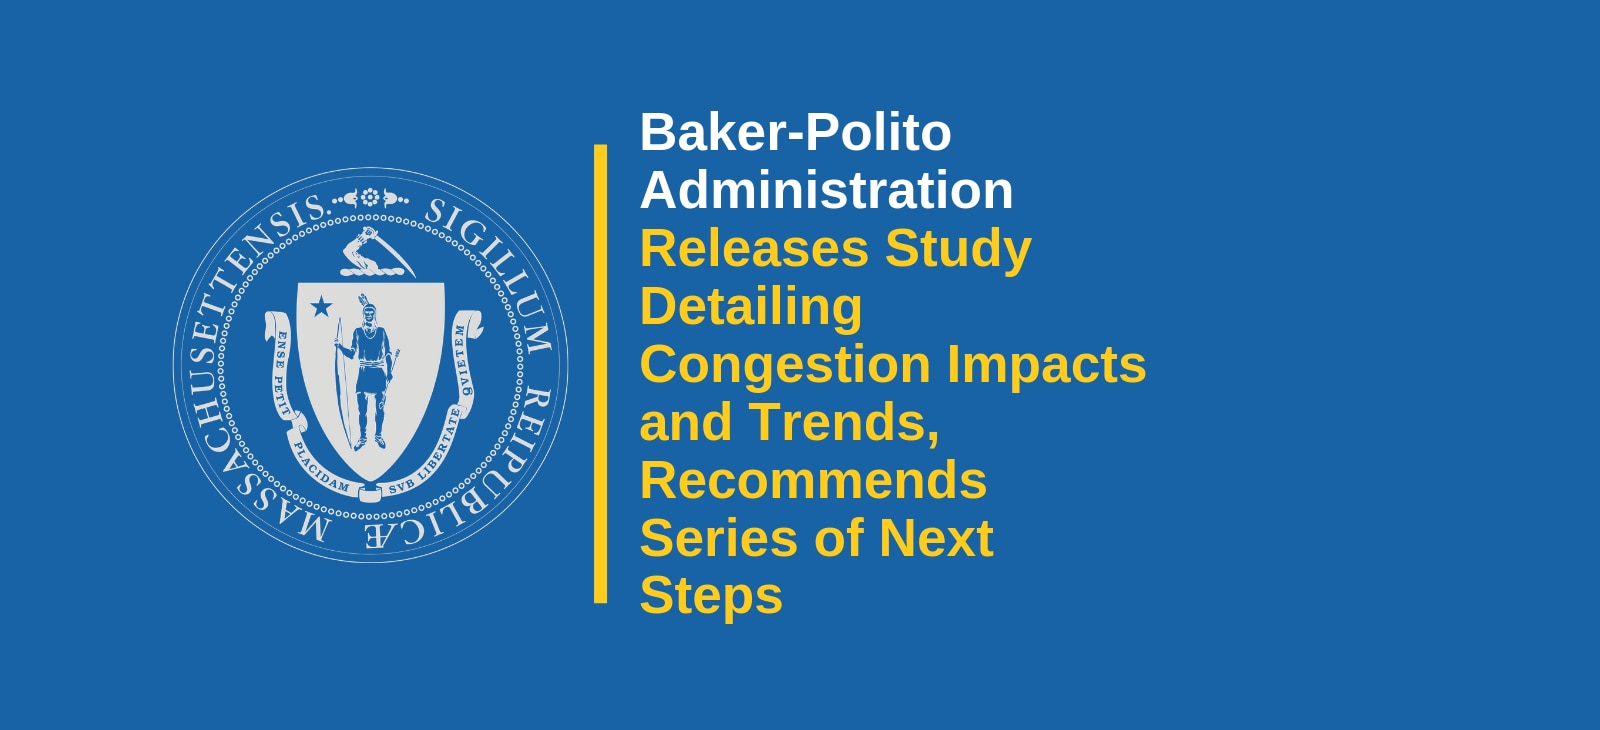 MassDOT Releases Study Detailing Congestion Impacts and Trends, Recommends Series of Next Steps